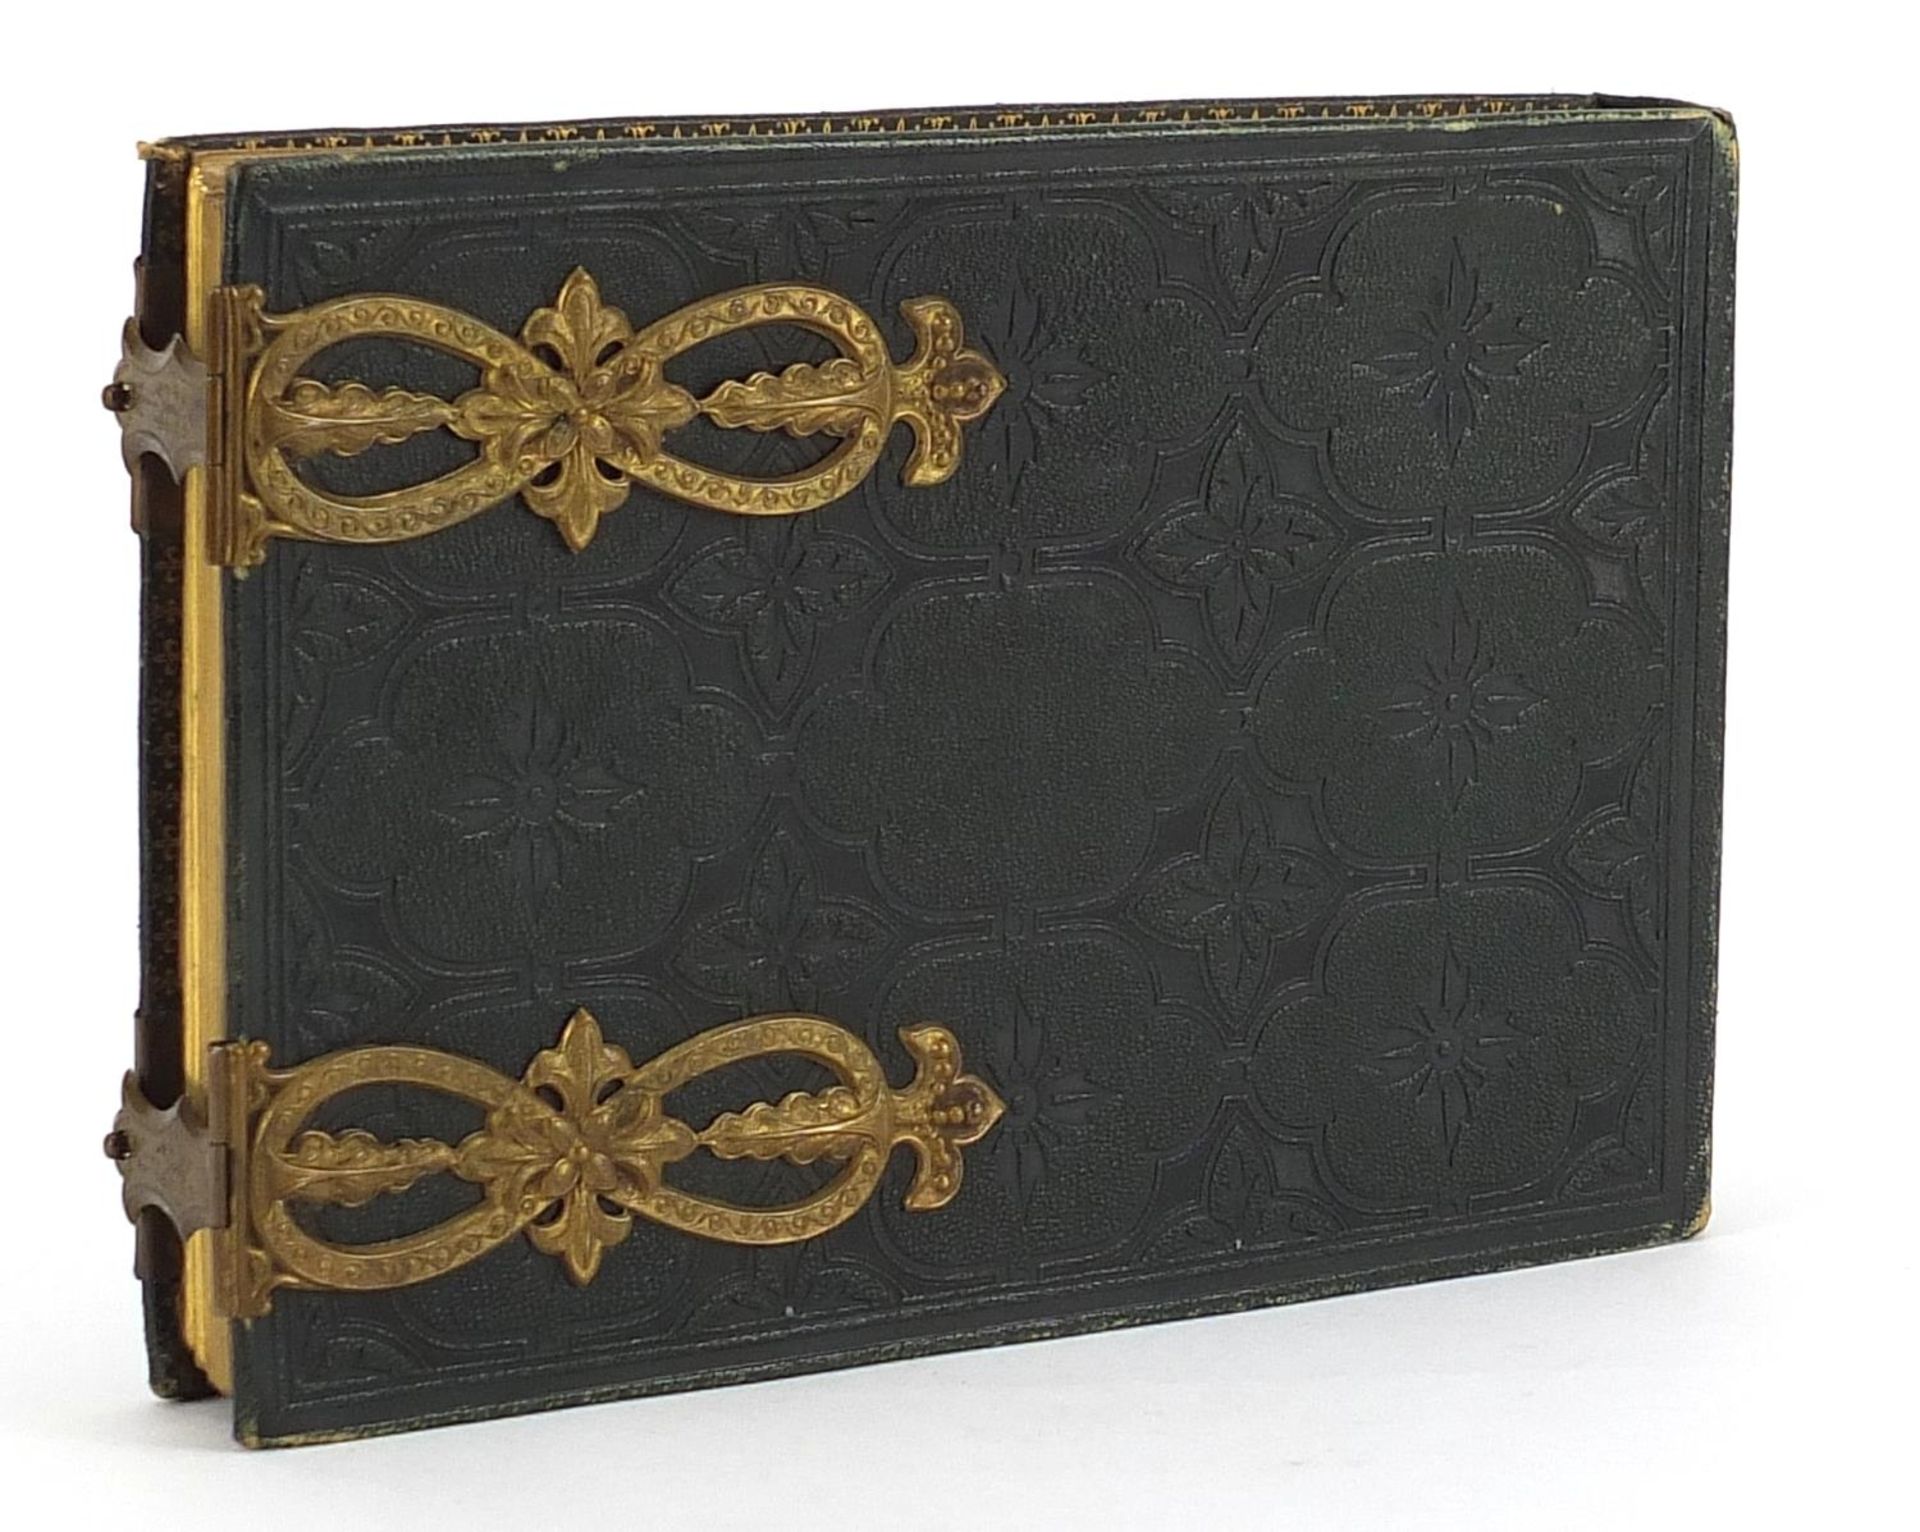 Collection of black and white cabinet cards and greetings cards arranged in a tooled leather album - Image 6 of 6